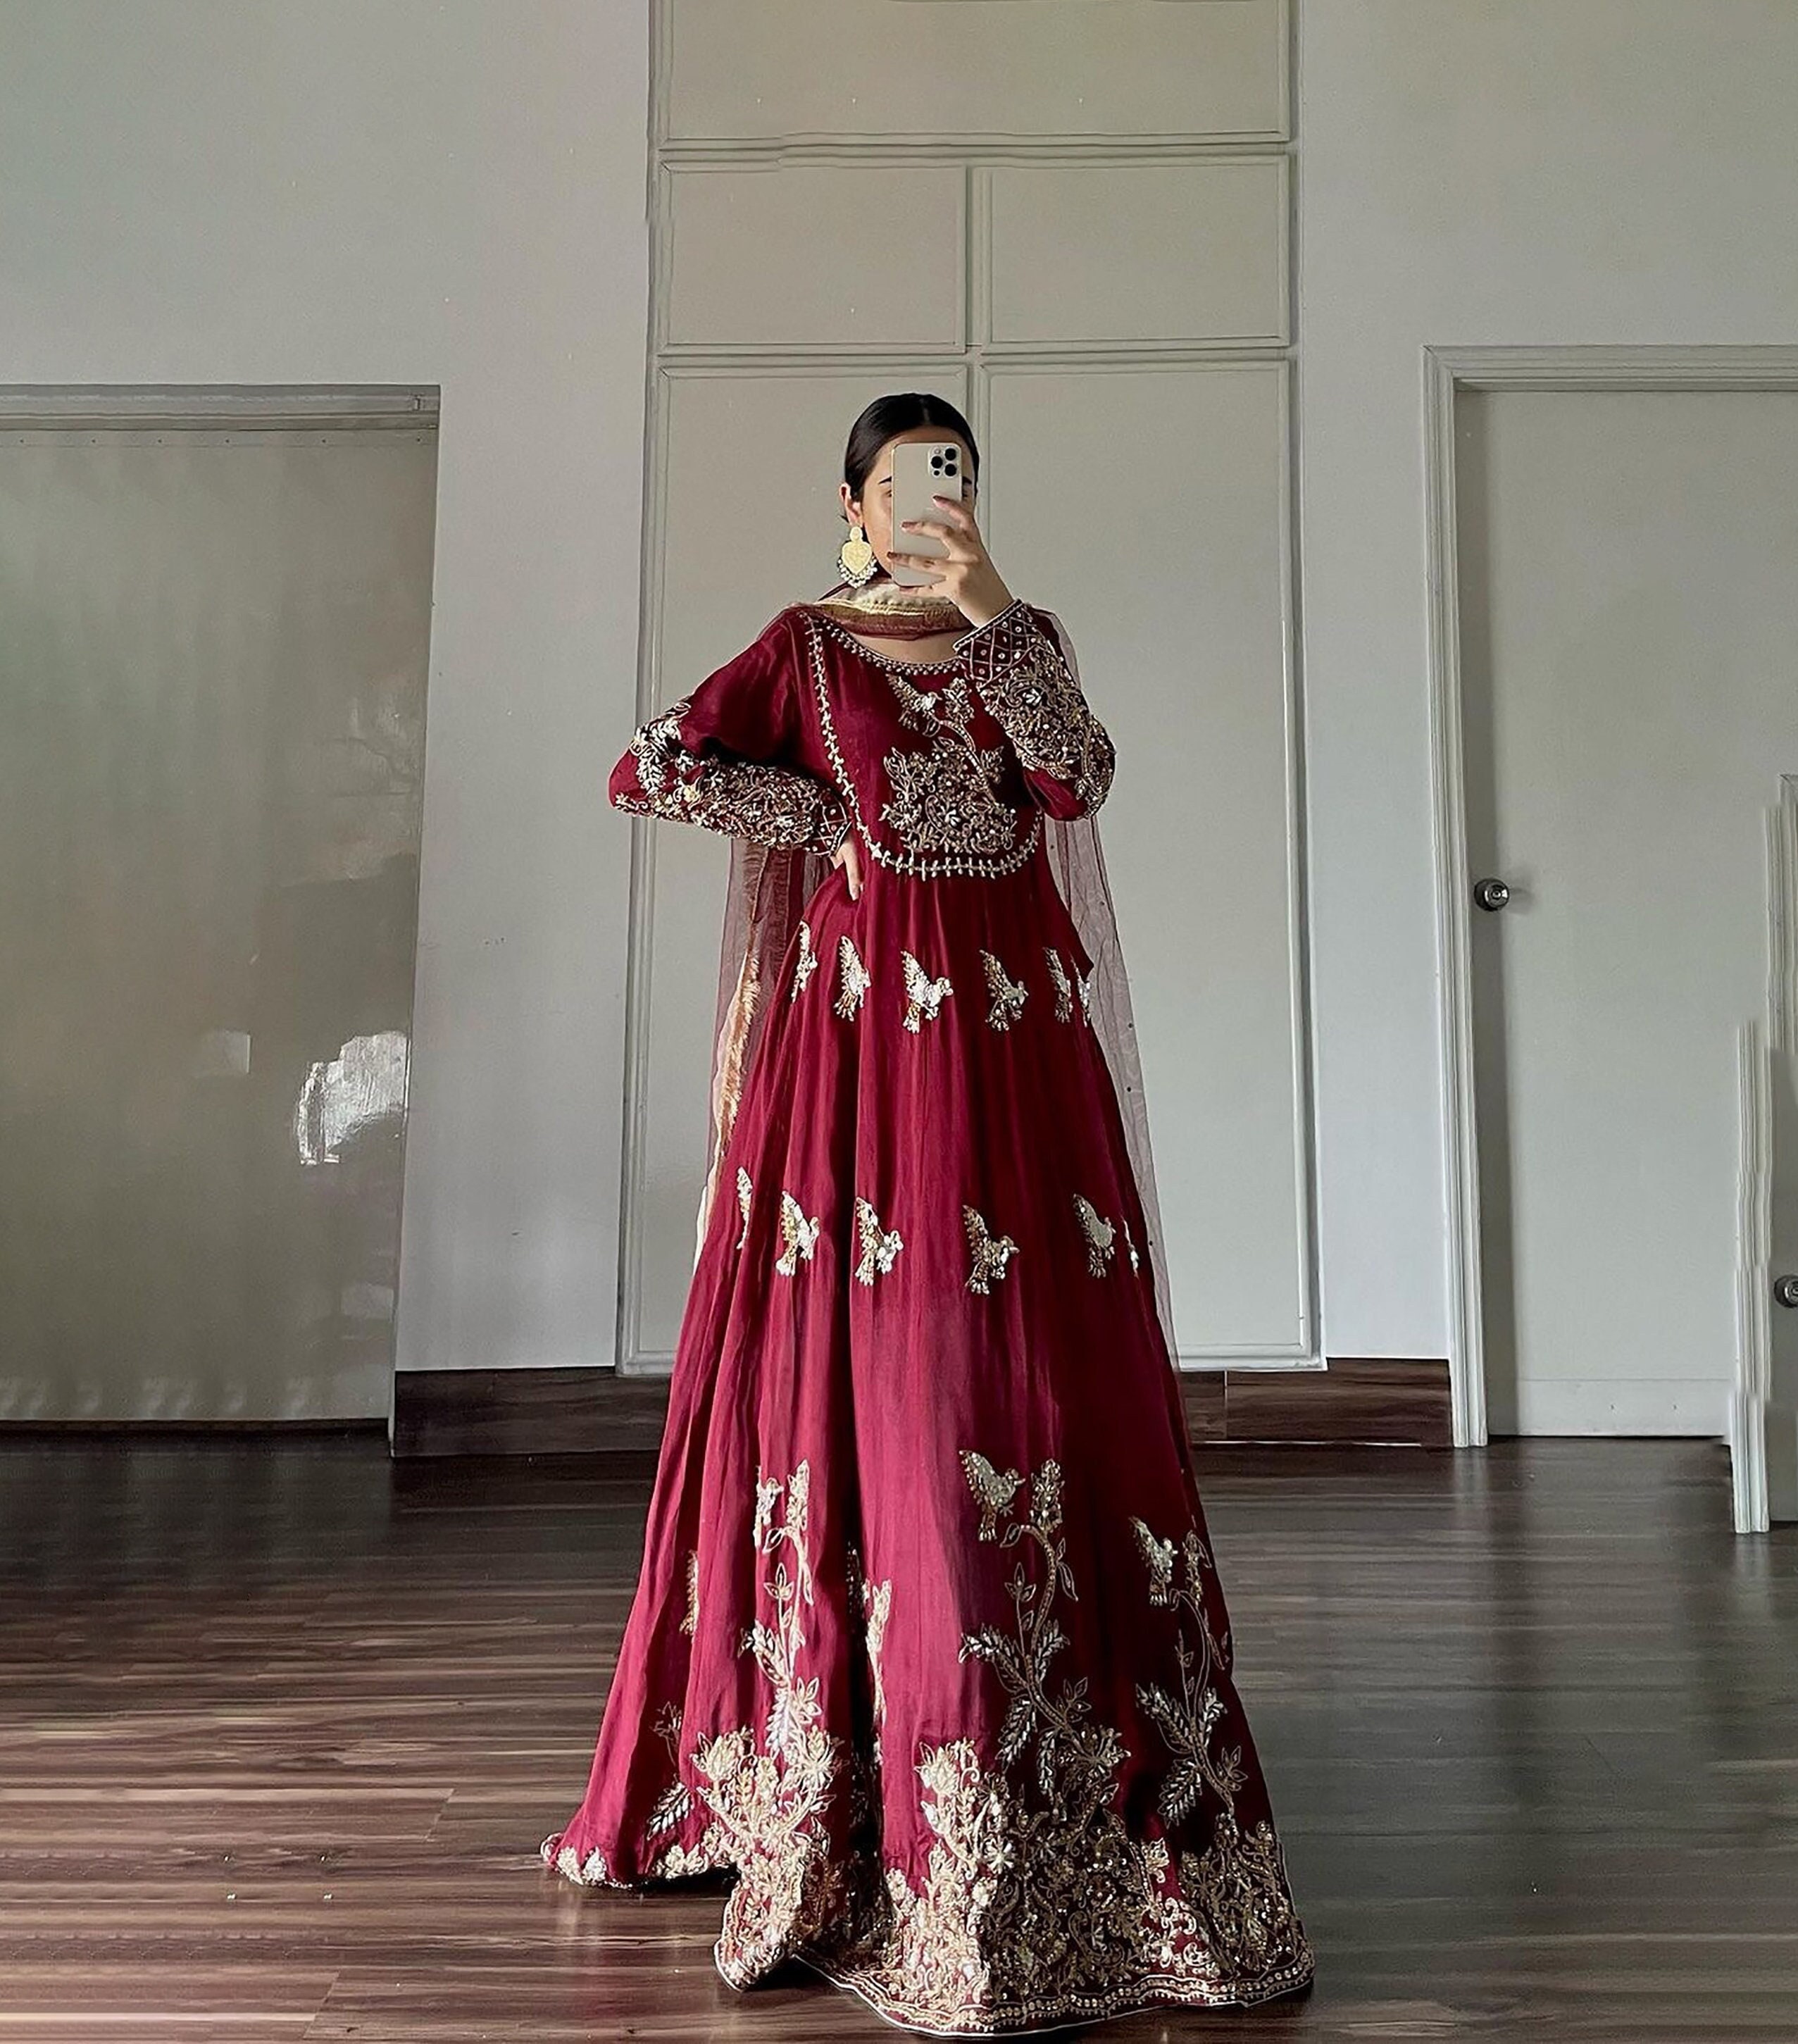 Sasya - @monami_ghosh seen here in our wine leather work gown. Style this  for a sangeet, engagement or even a reception. . . # #indian #indianwedding  #indianwear #indianfashion #gowns #leather-detailing #wine #engagement-gowns  #